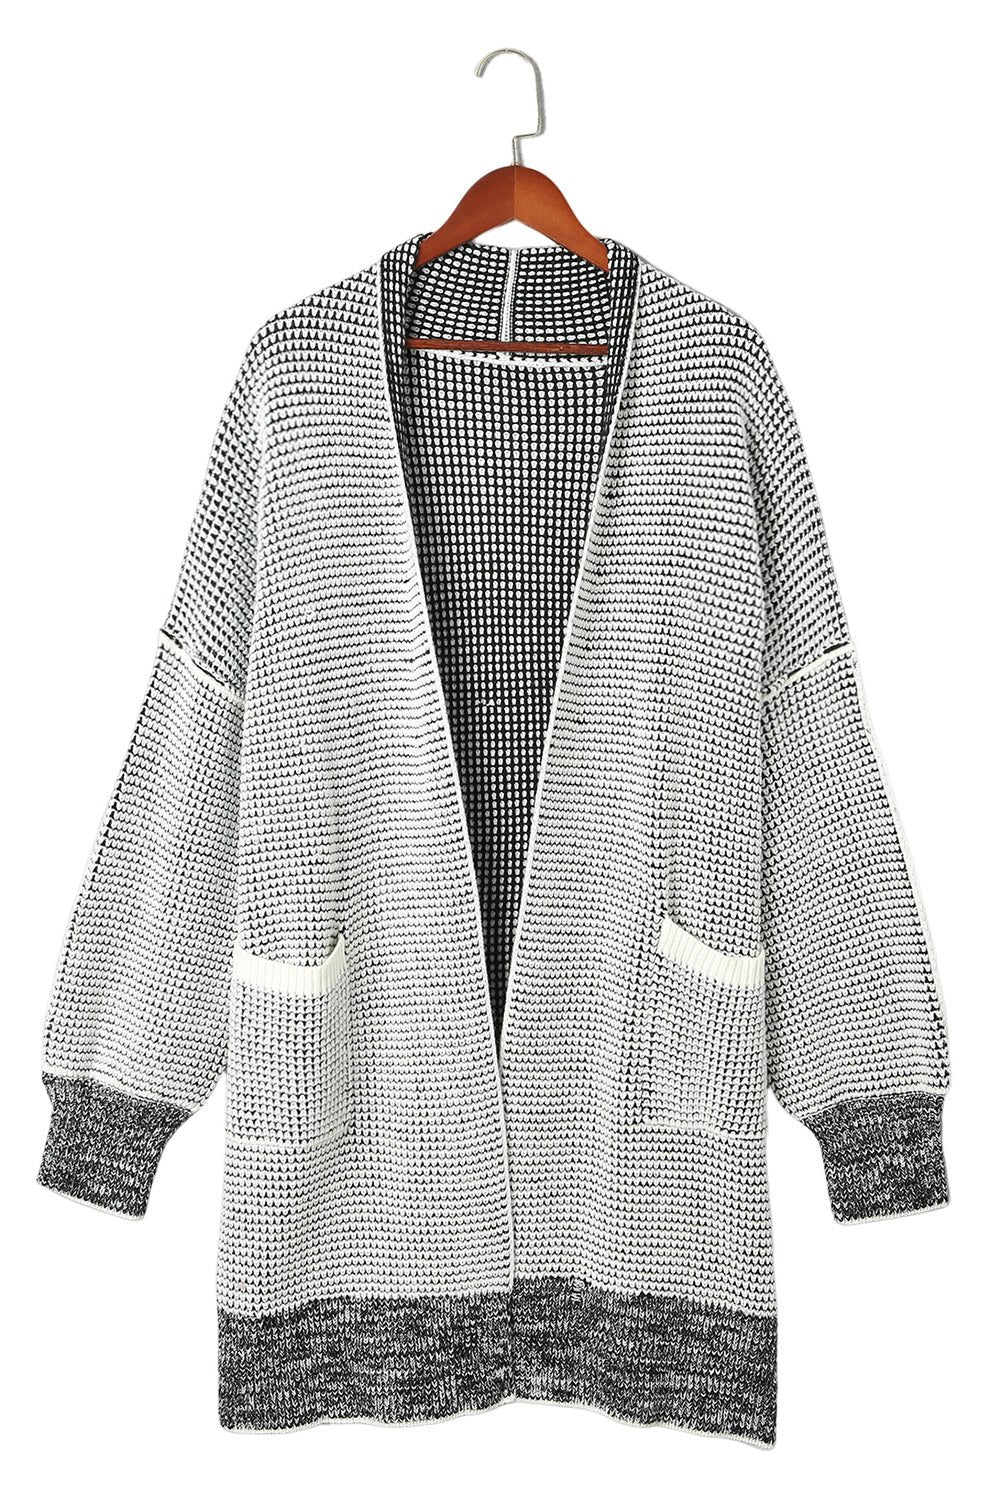 Fashionsarah.com Gray Textured Knit Pocketed Duster Cardigan